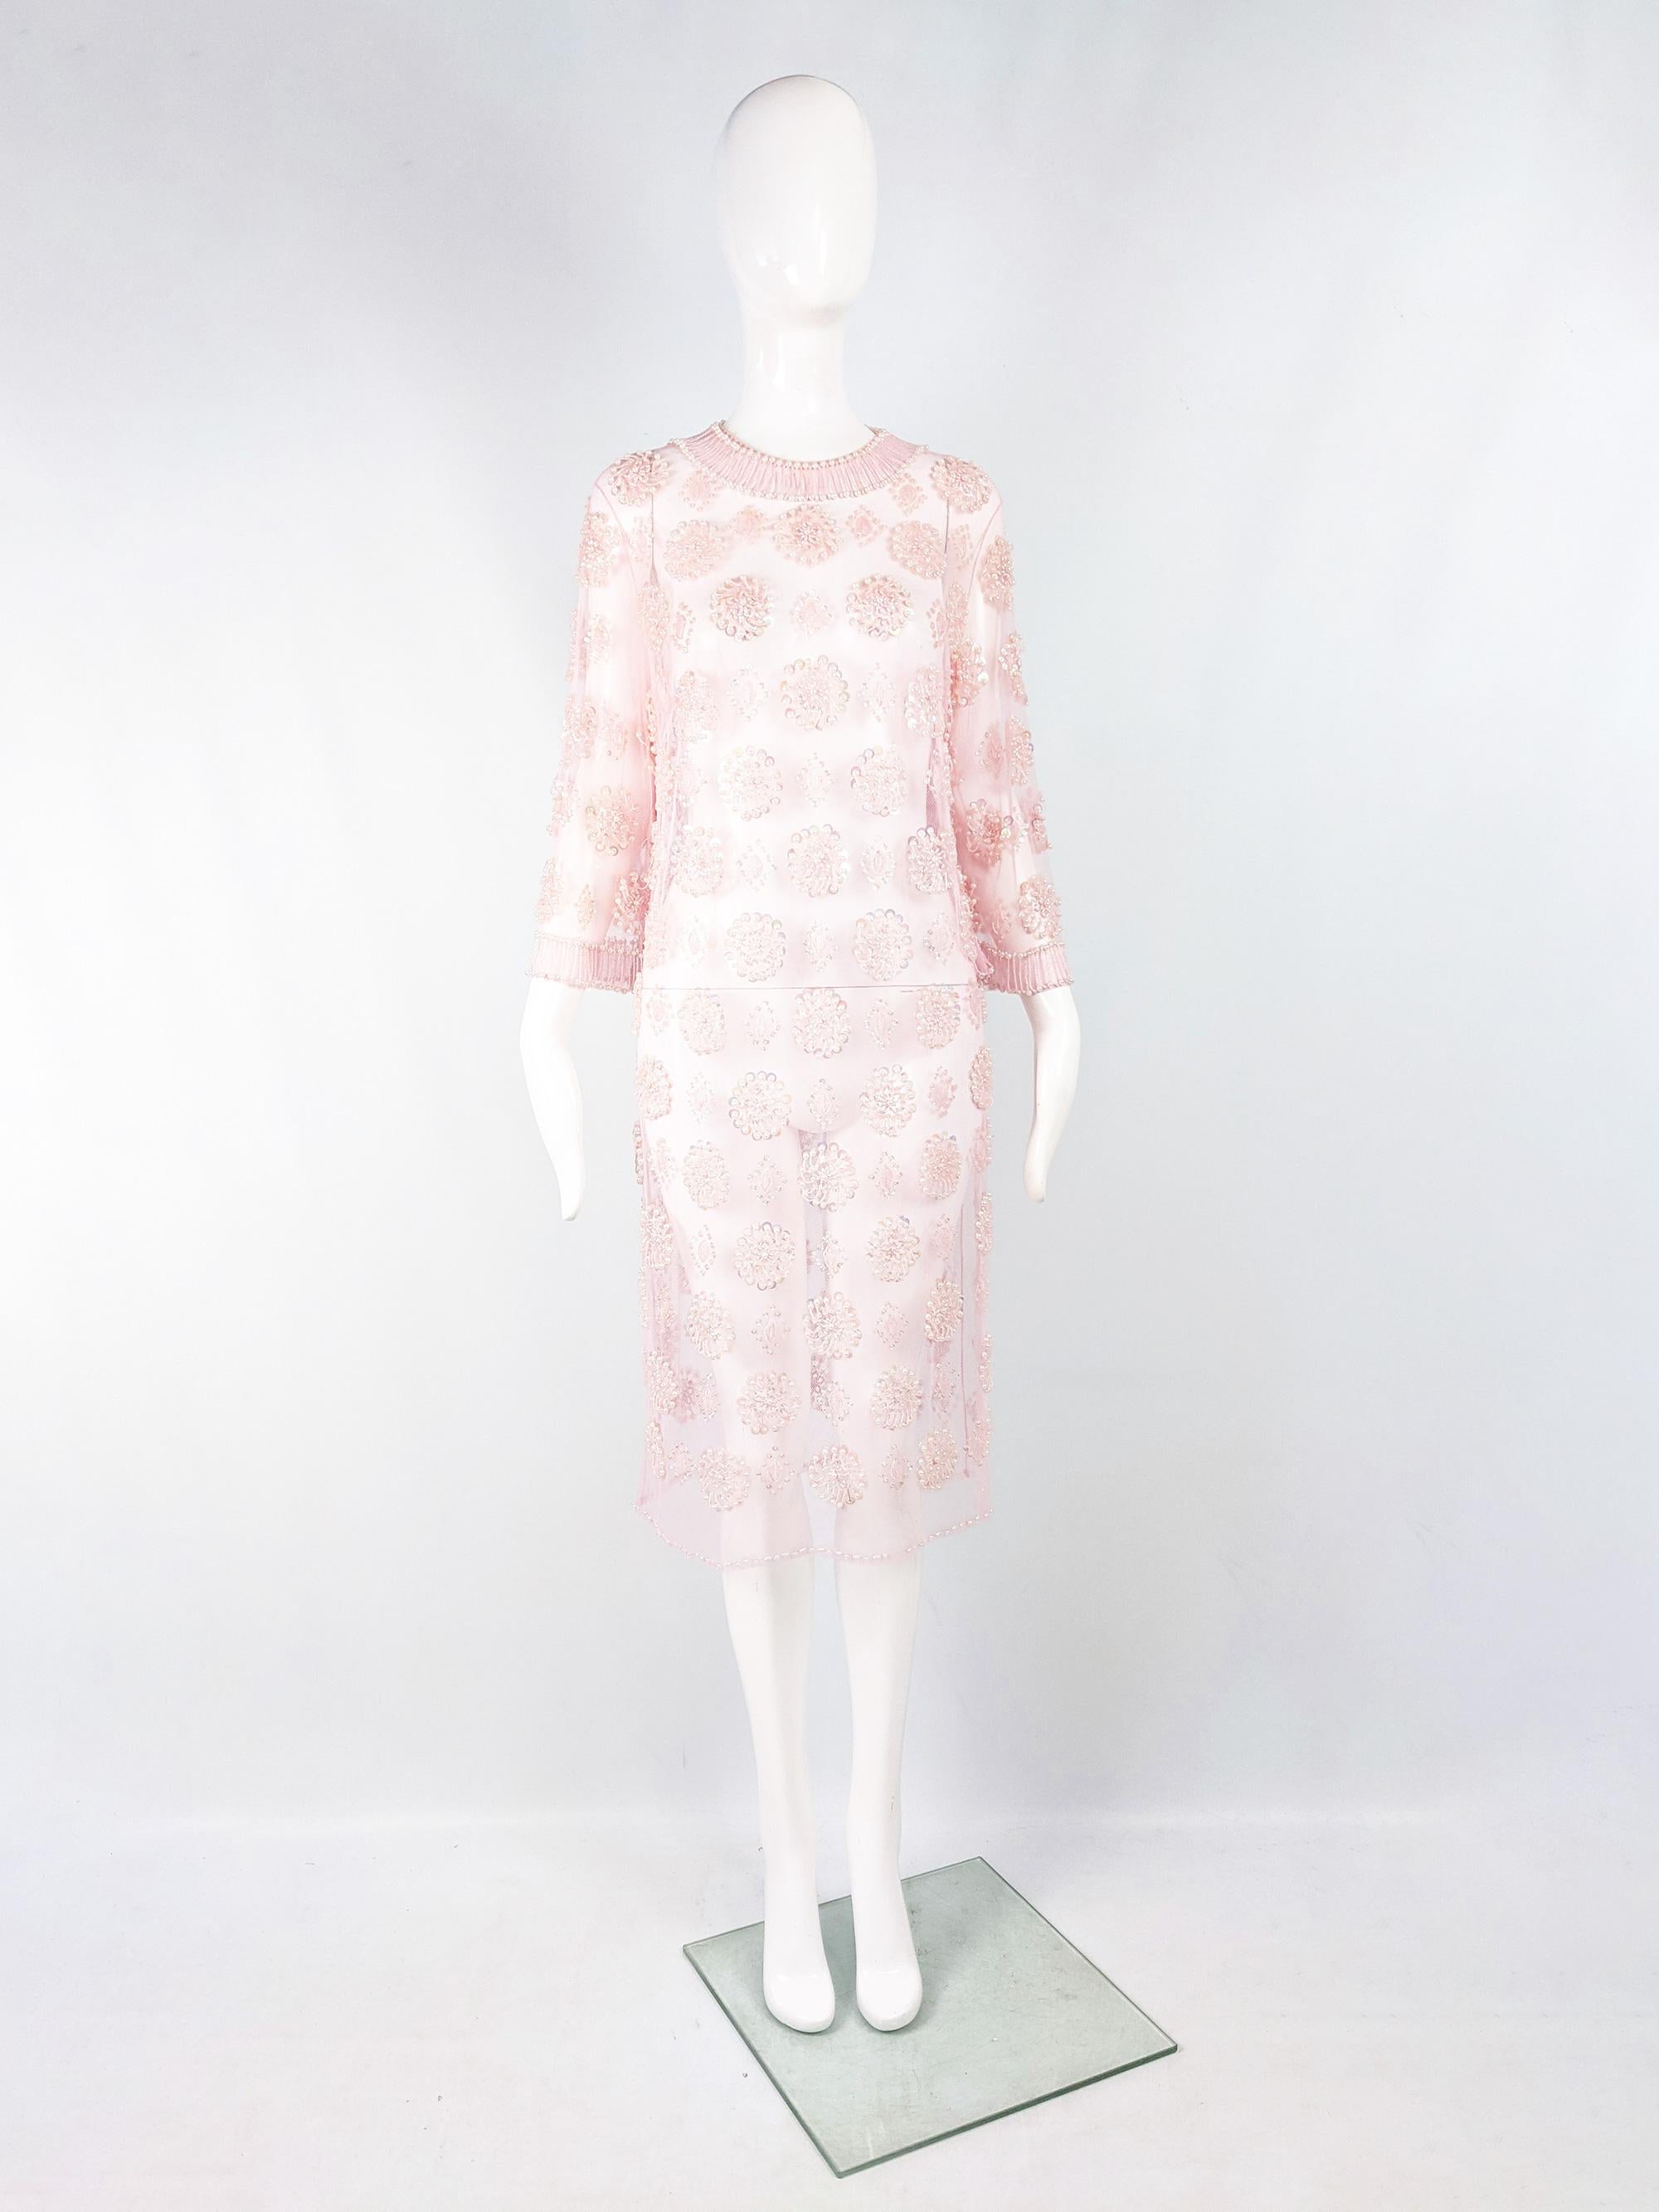 An amazing vintage womens dress from the 60s in a completely sheer, beaded and sequinned delicate mesh fabric which makes it so versatile, allowing for a slip, contrasting dress or bra and shorts to be worn underneath. It has a slightly wide sleeve